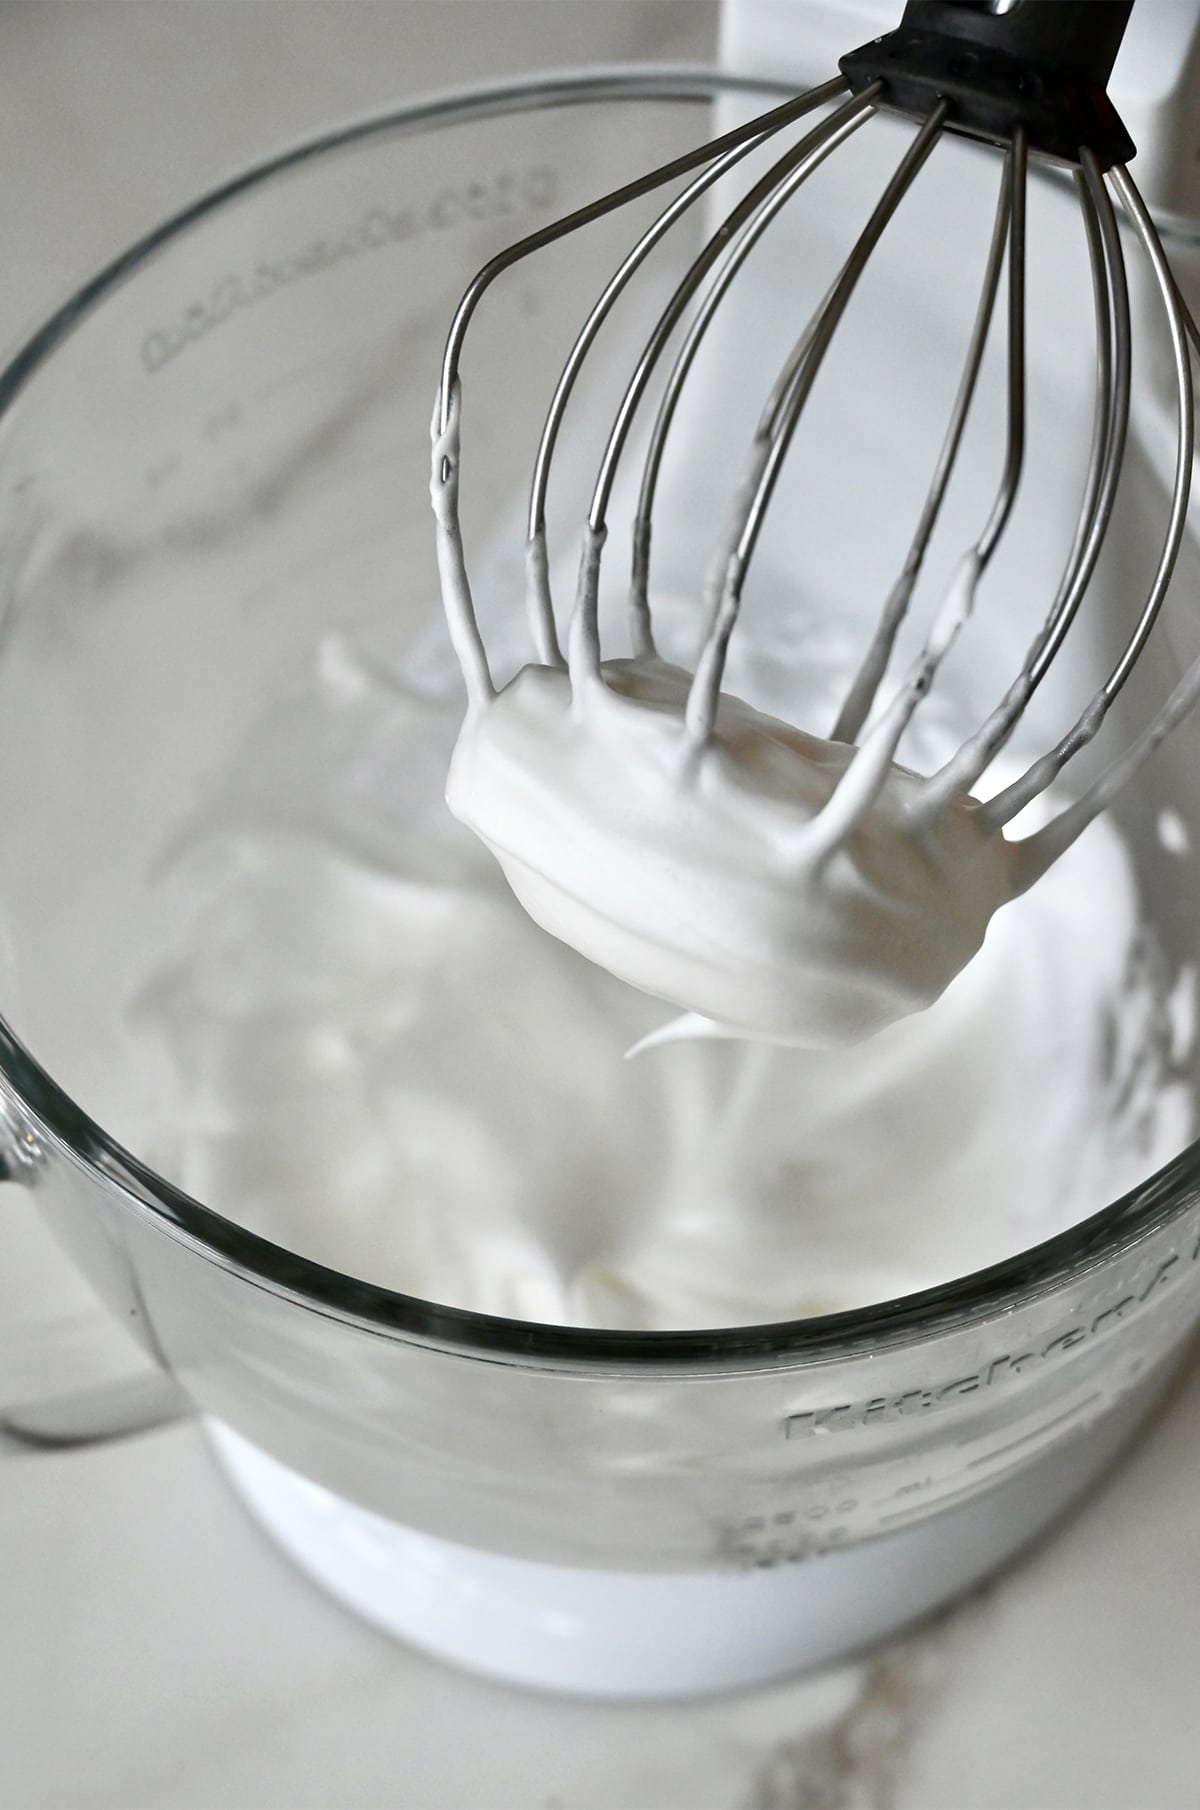 Whipped egg whites in the bowl of a stand mixer fitted with the whisk attachment.